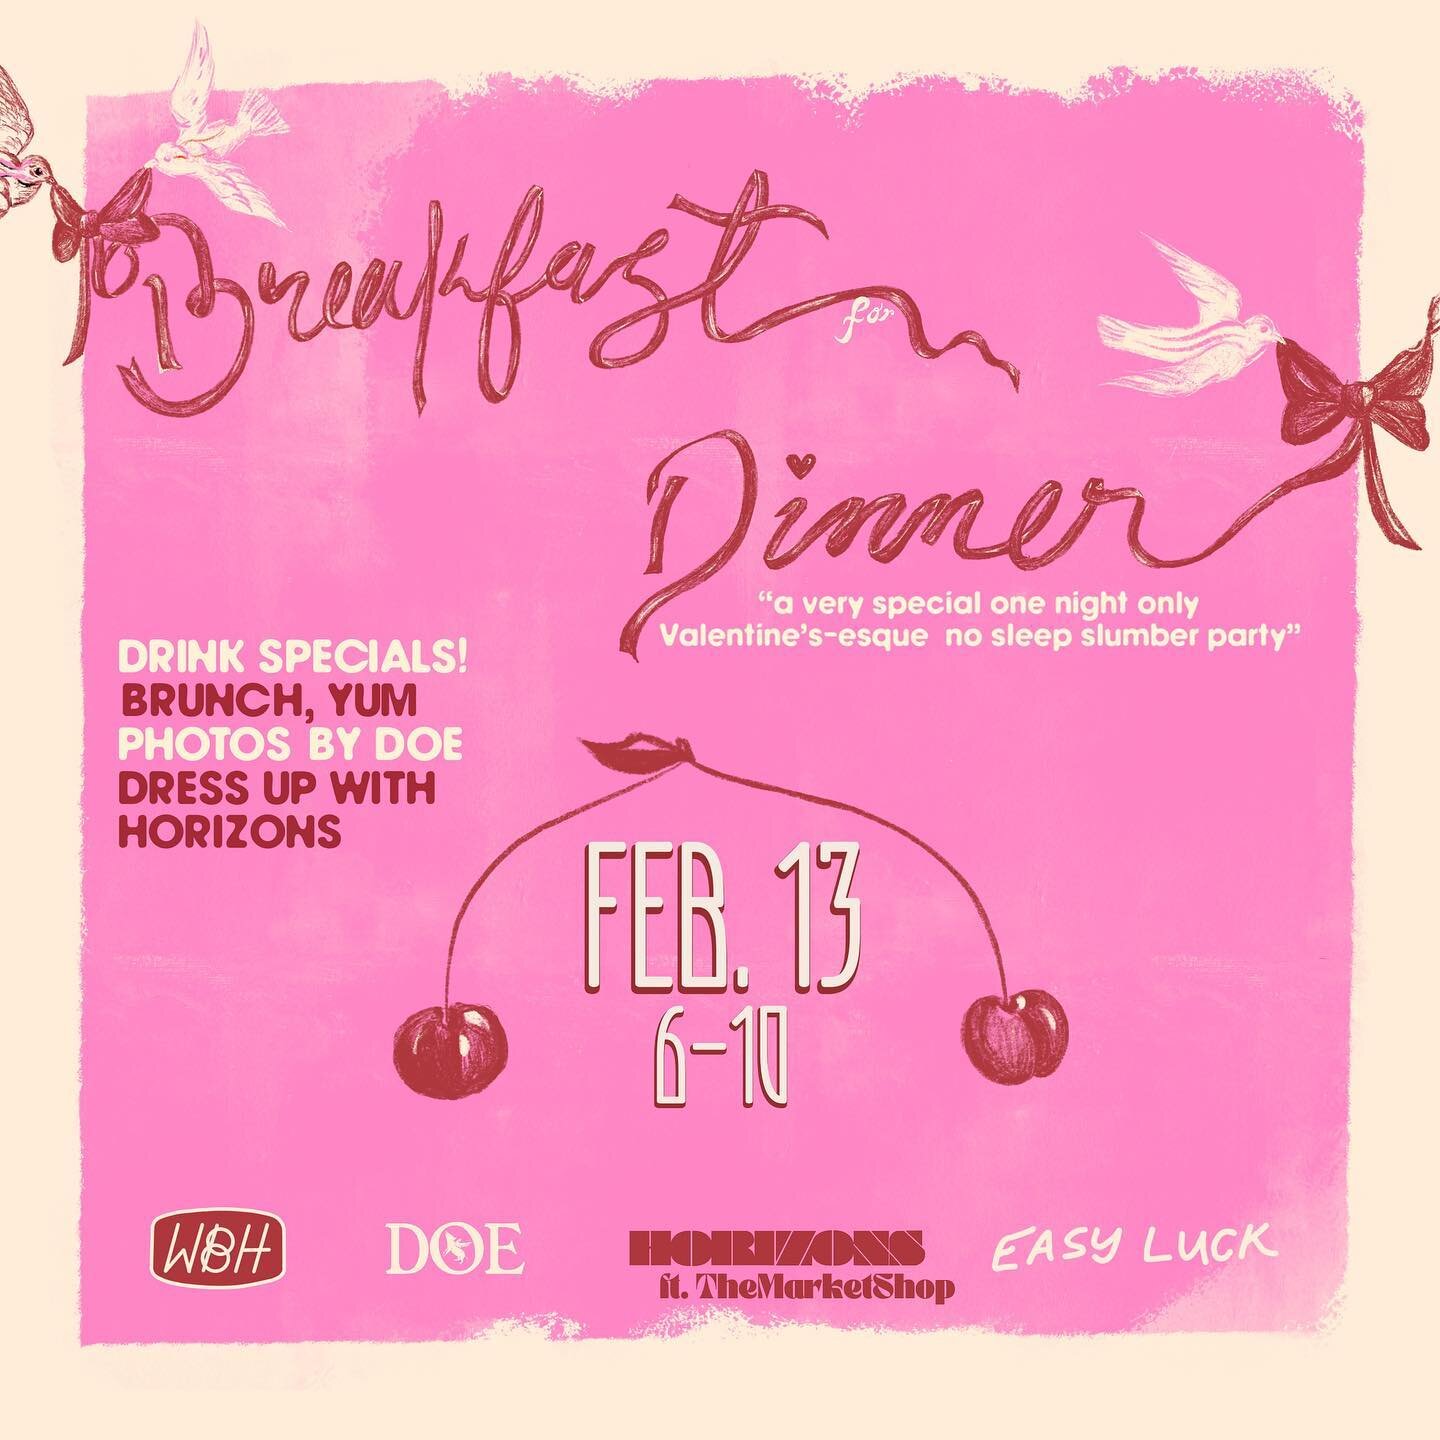 we&rsquo;re throwing &ldquo;a very special one-night only Valentine&rsquo;s-esque no sleep slumber party&rdquo; just for you, 🎀Breakfast For Dinner🎀

Feb. 13 | 6-10 PM

Drink specials from @whippoorwillbeerhouse 
Breakfast for Dinner by @easyluckor